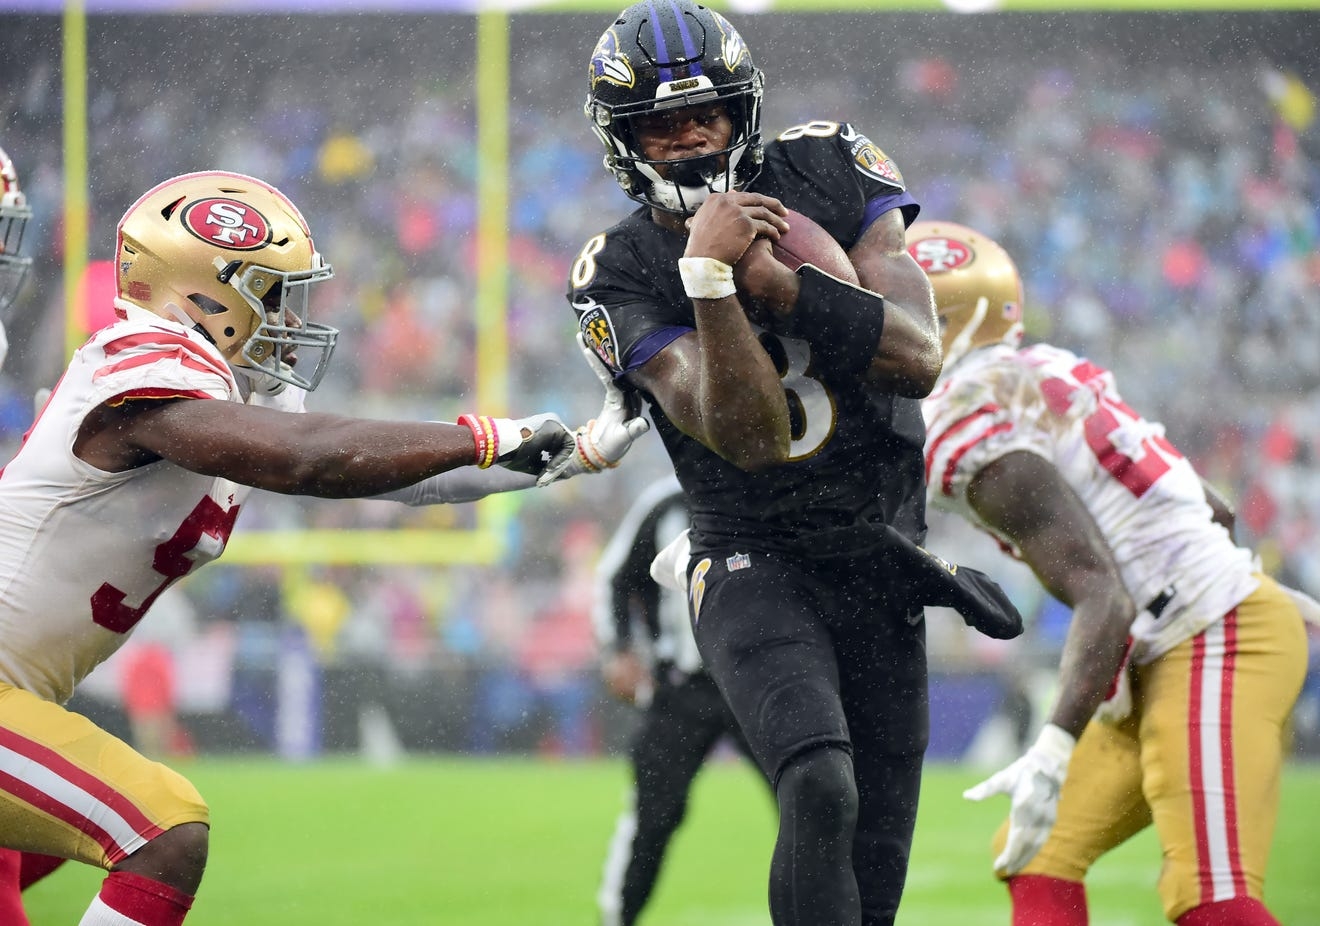 San Francisco 49ers radio analyst Tim Ryan suspended for comments about Lamar Jackson